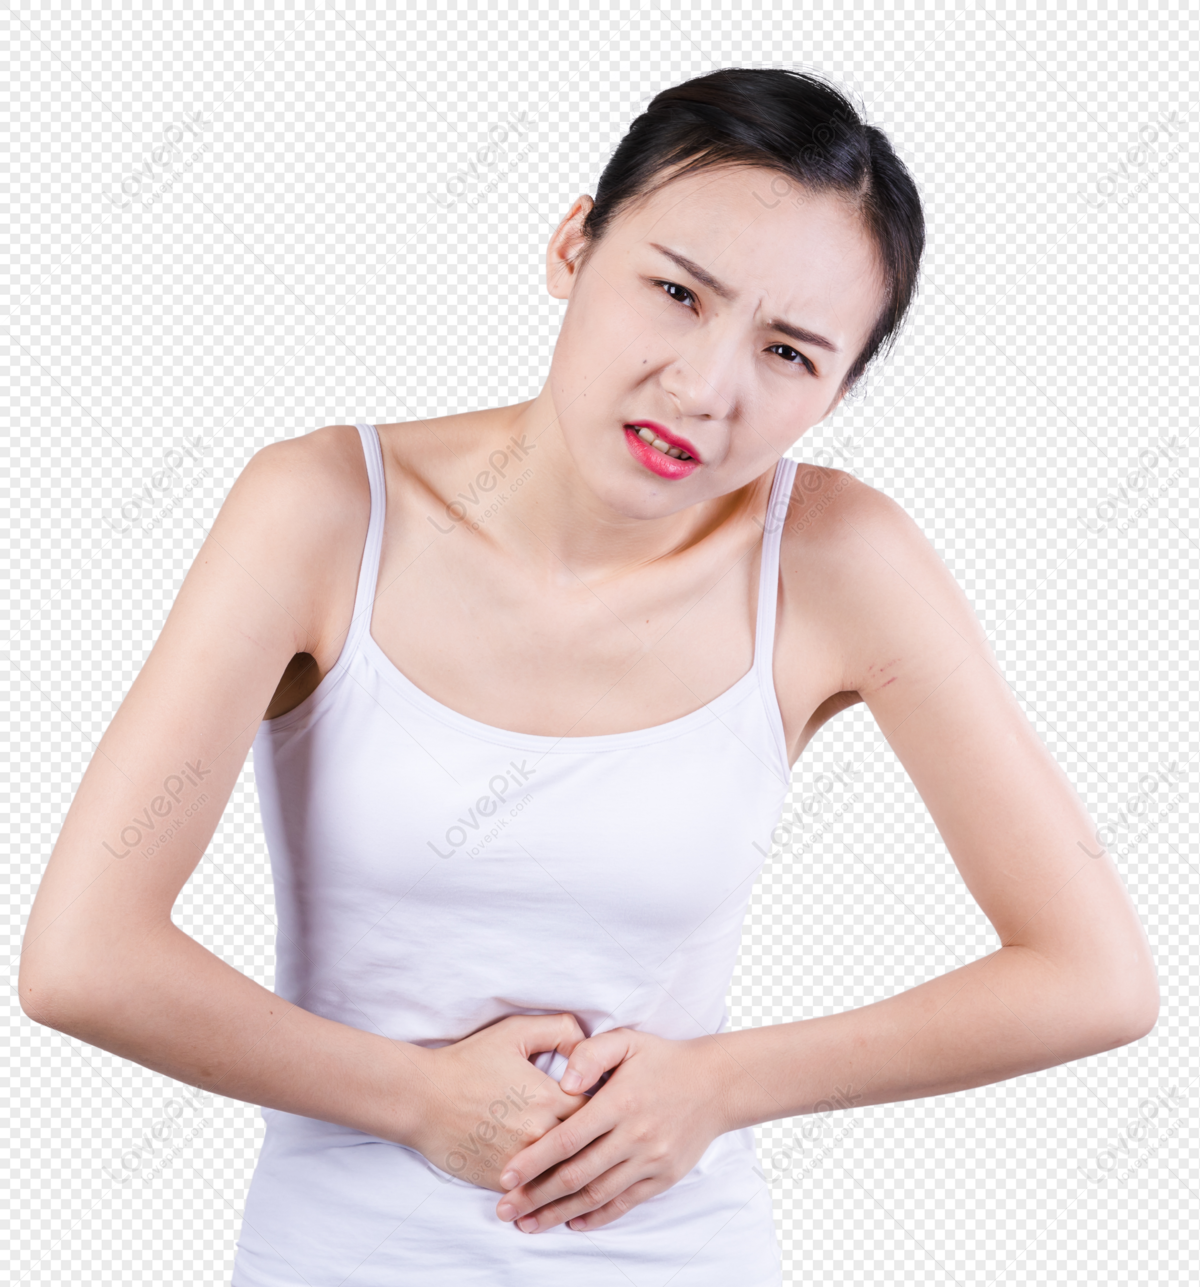 Stomach Ache Characters Real People Babe PNG White Transparent And Clipart Image For Free